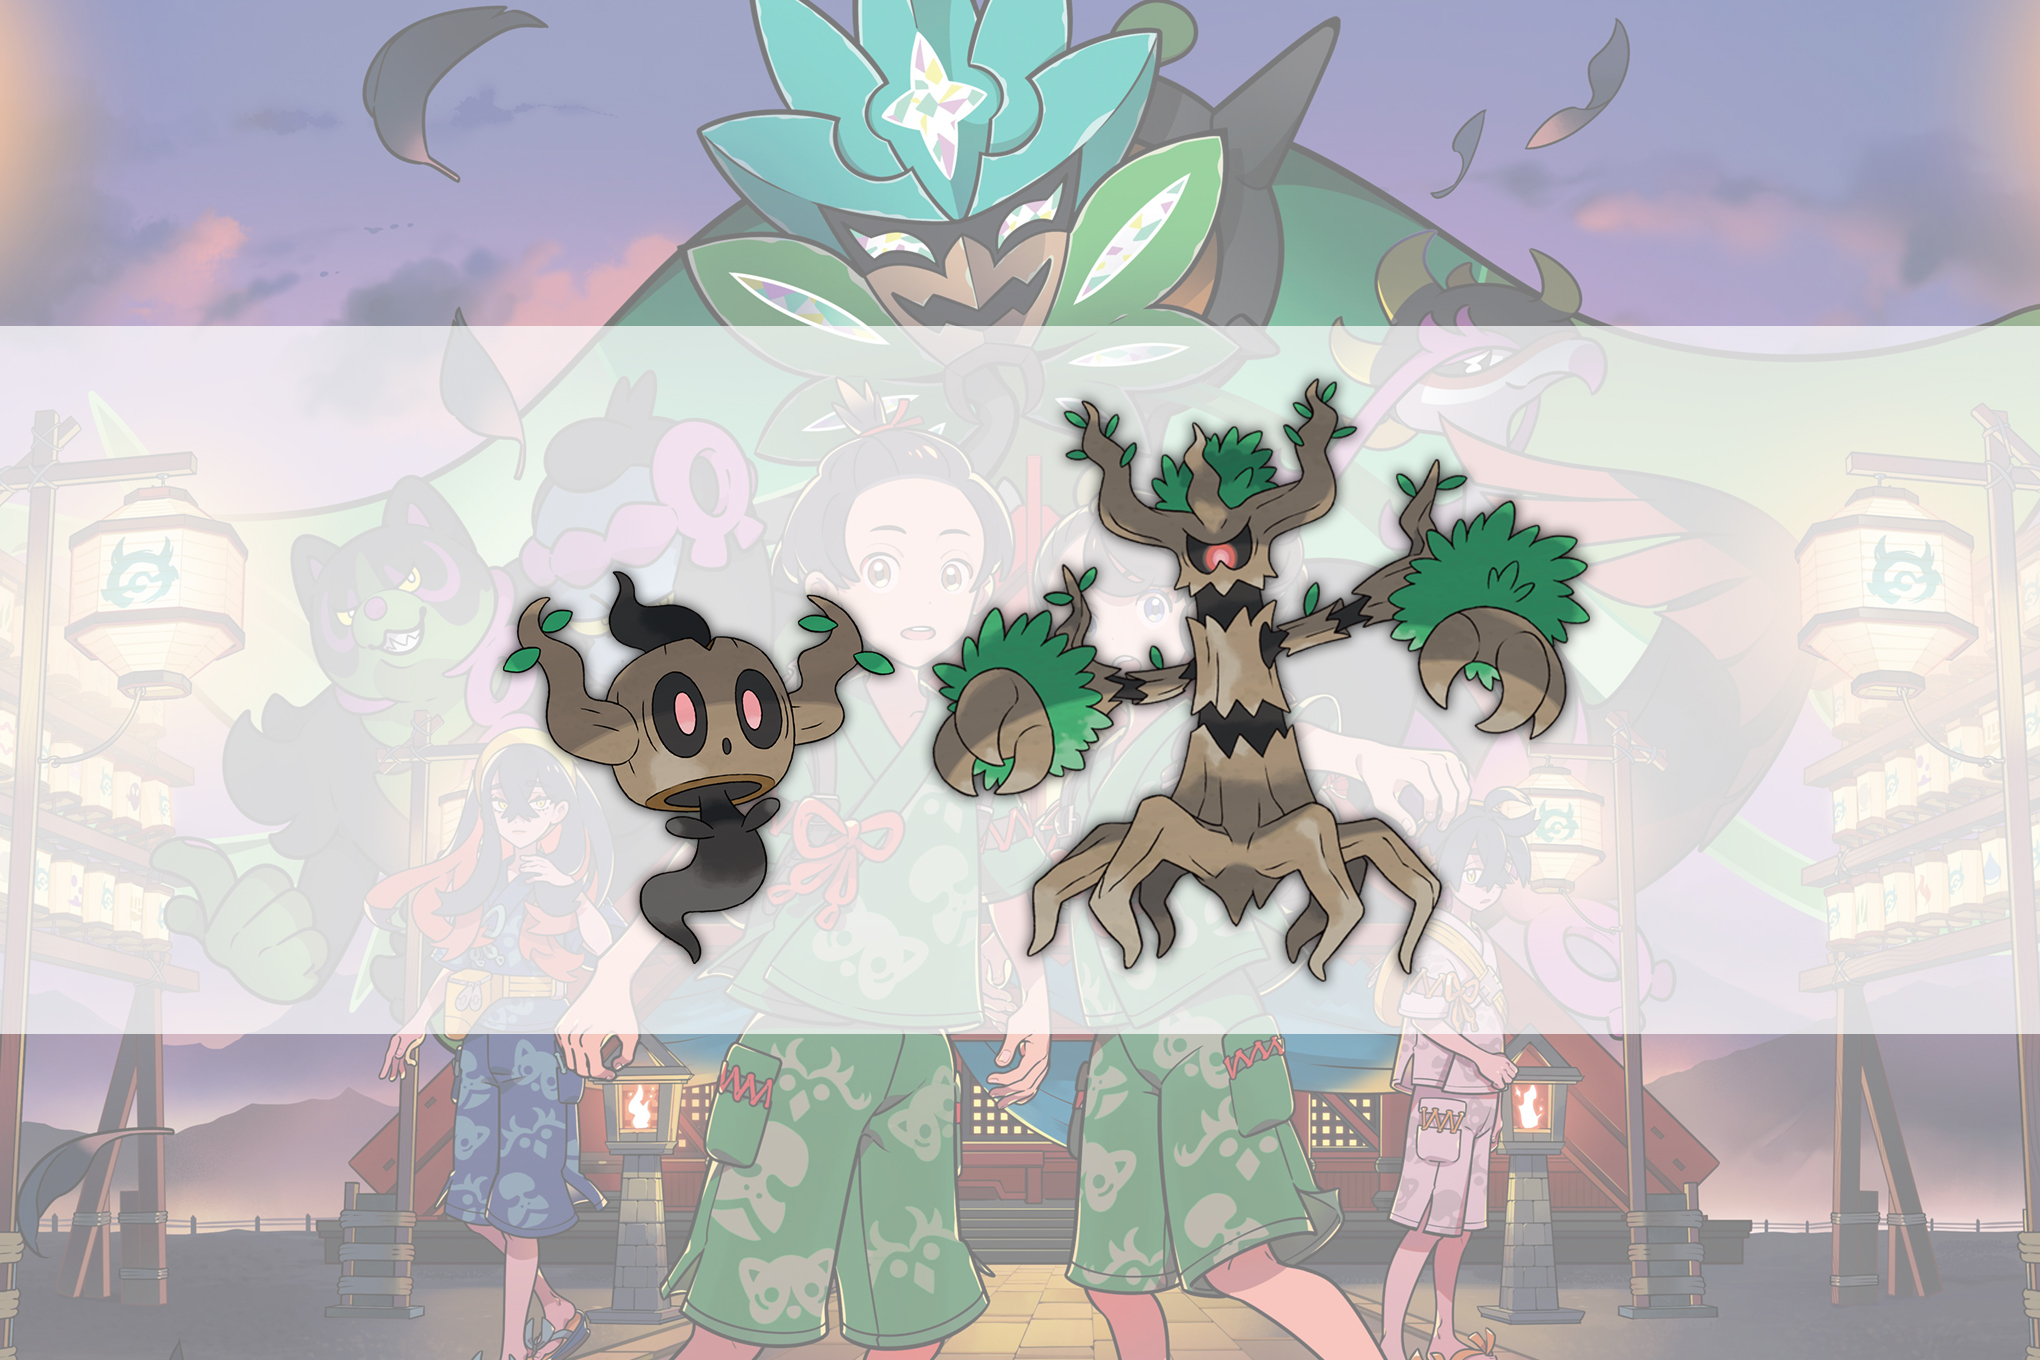 Phantump and Trevenant over the key art for The Teal Mask